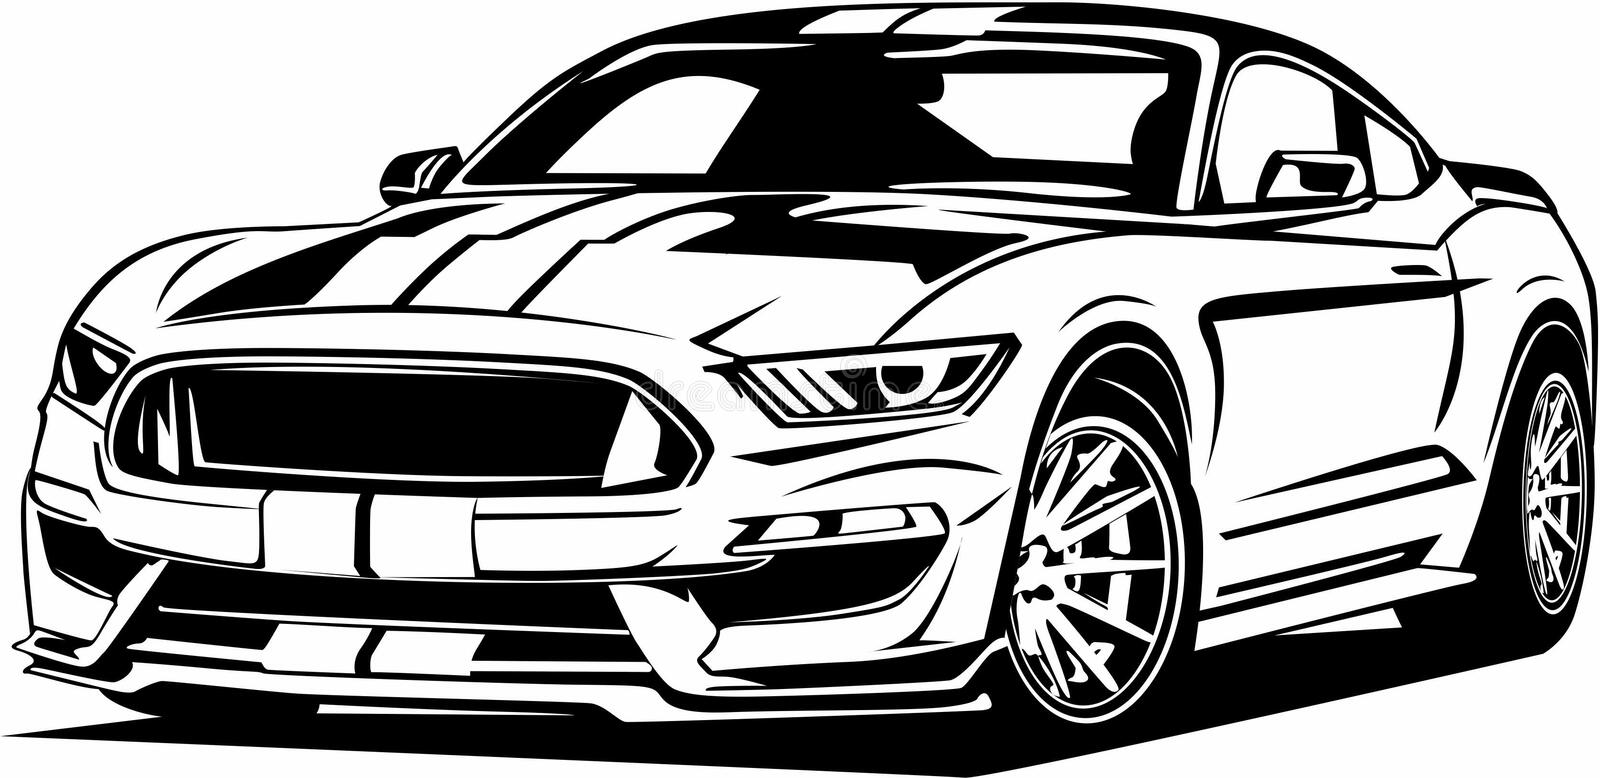 Ford Mustang Clipart Black And White - KibrisPDR